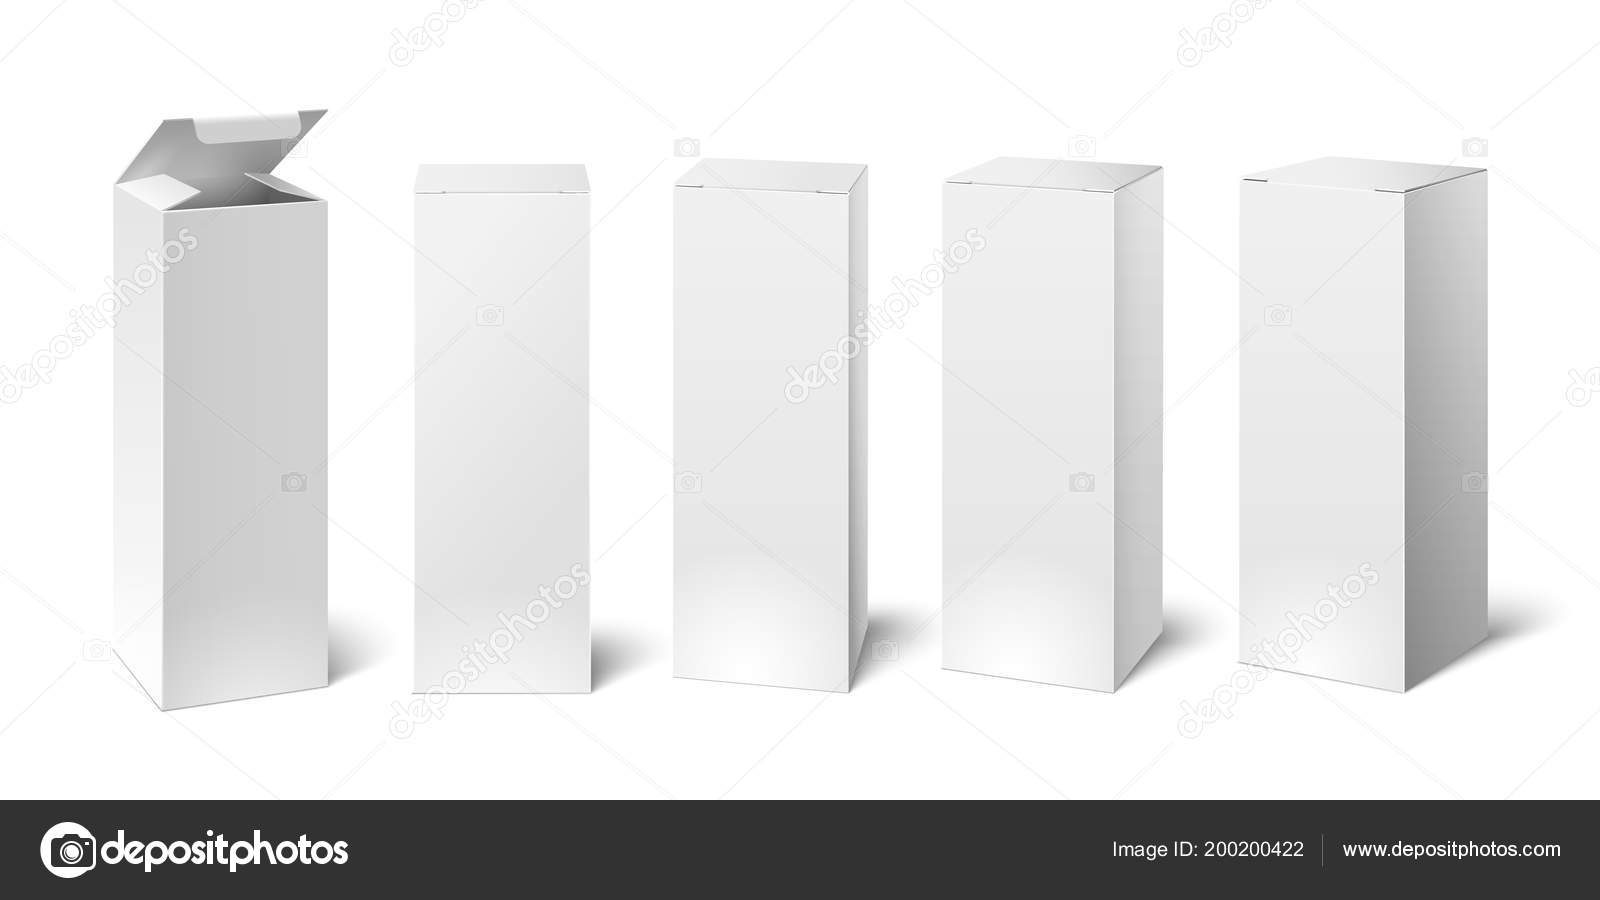 Download High White Cardboard Box Mockup Set Of Cosmetic Or Medical Packaging Paper Boxes Vector Illustration Vector Image By C Tartila Stock Gmail Com Vector Stock 200200422